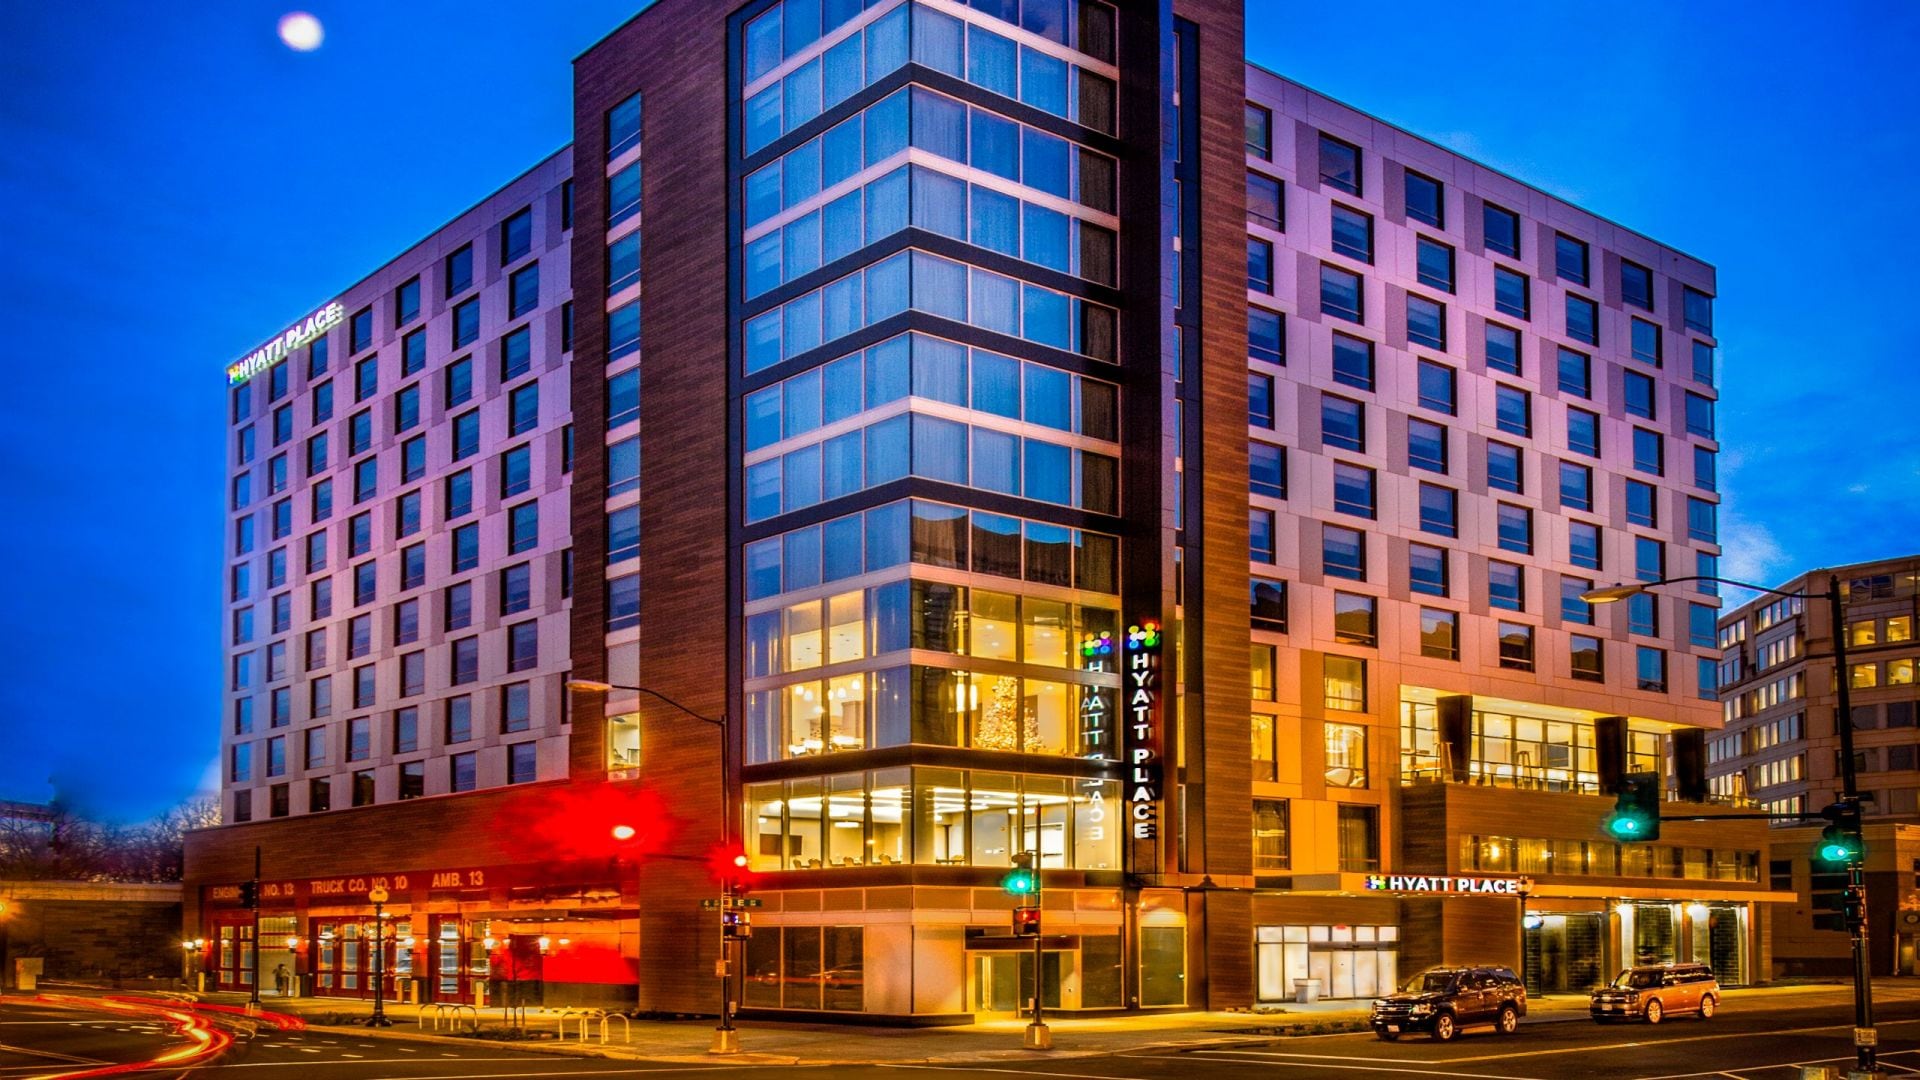 centrally-located-national-mall-hotel-in-washington-dc-hyatt-place